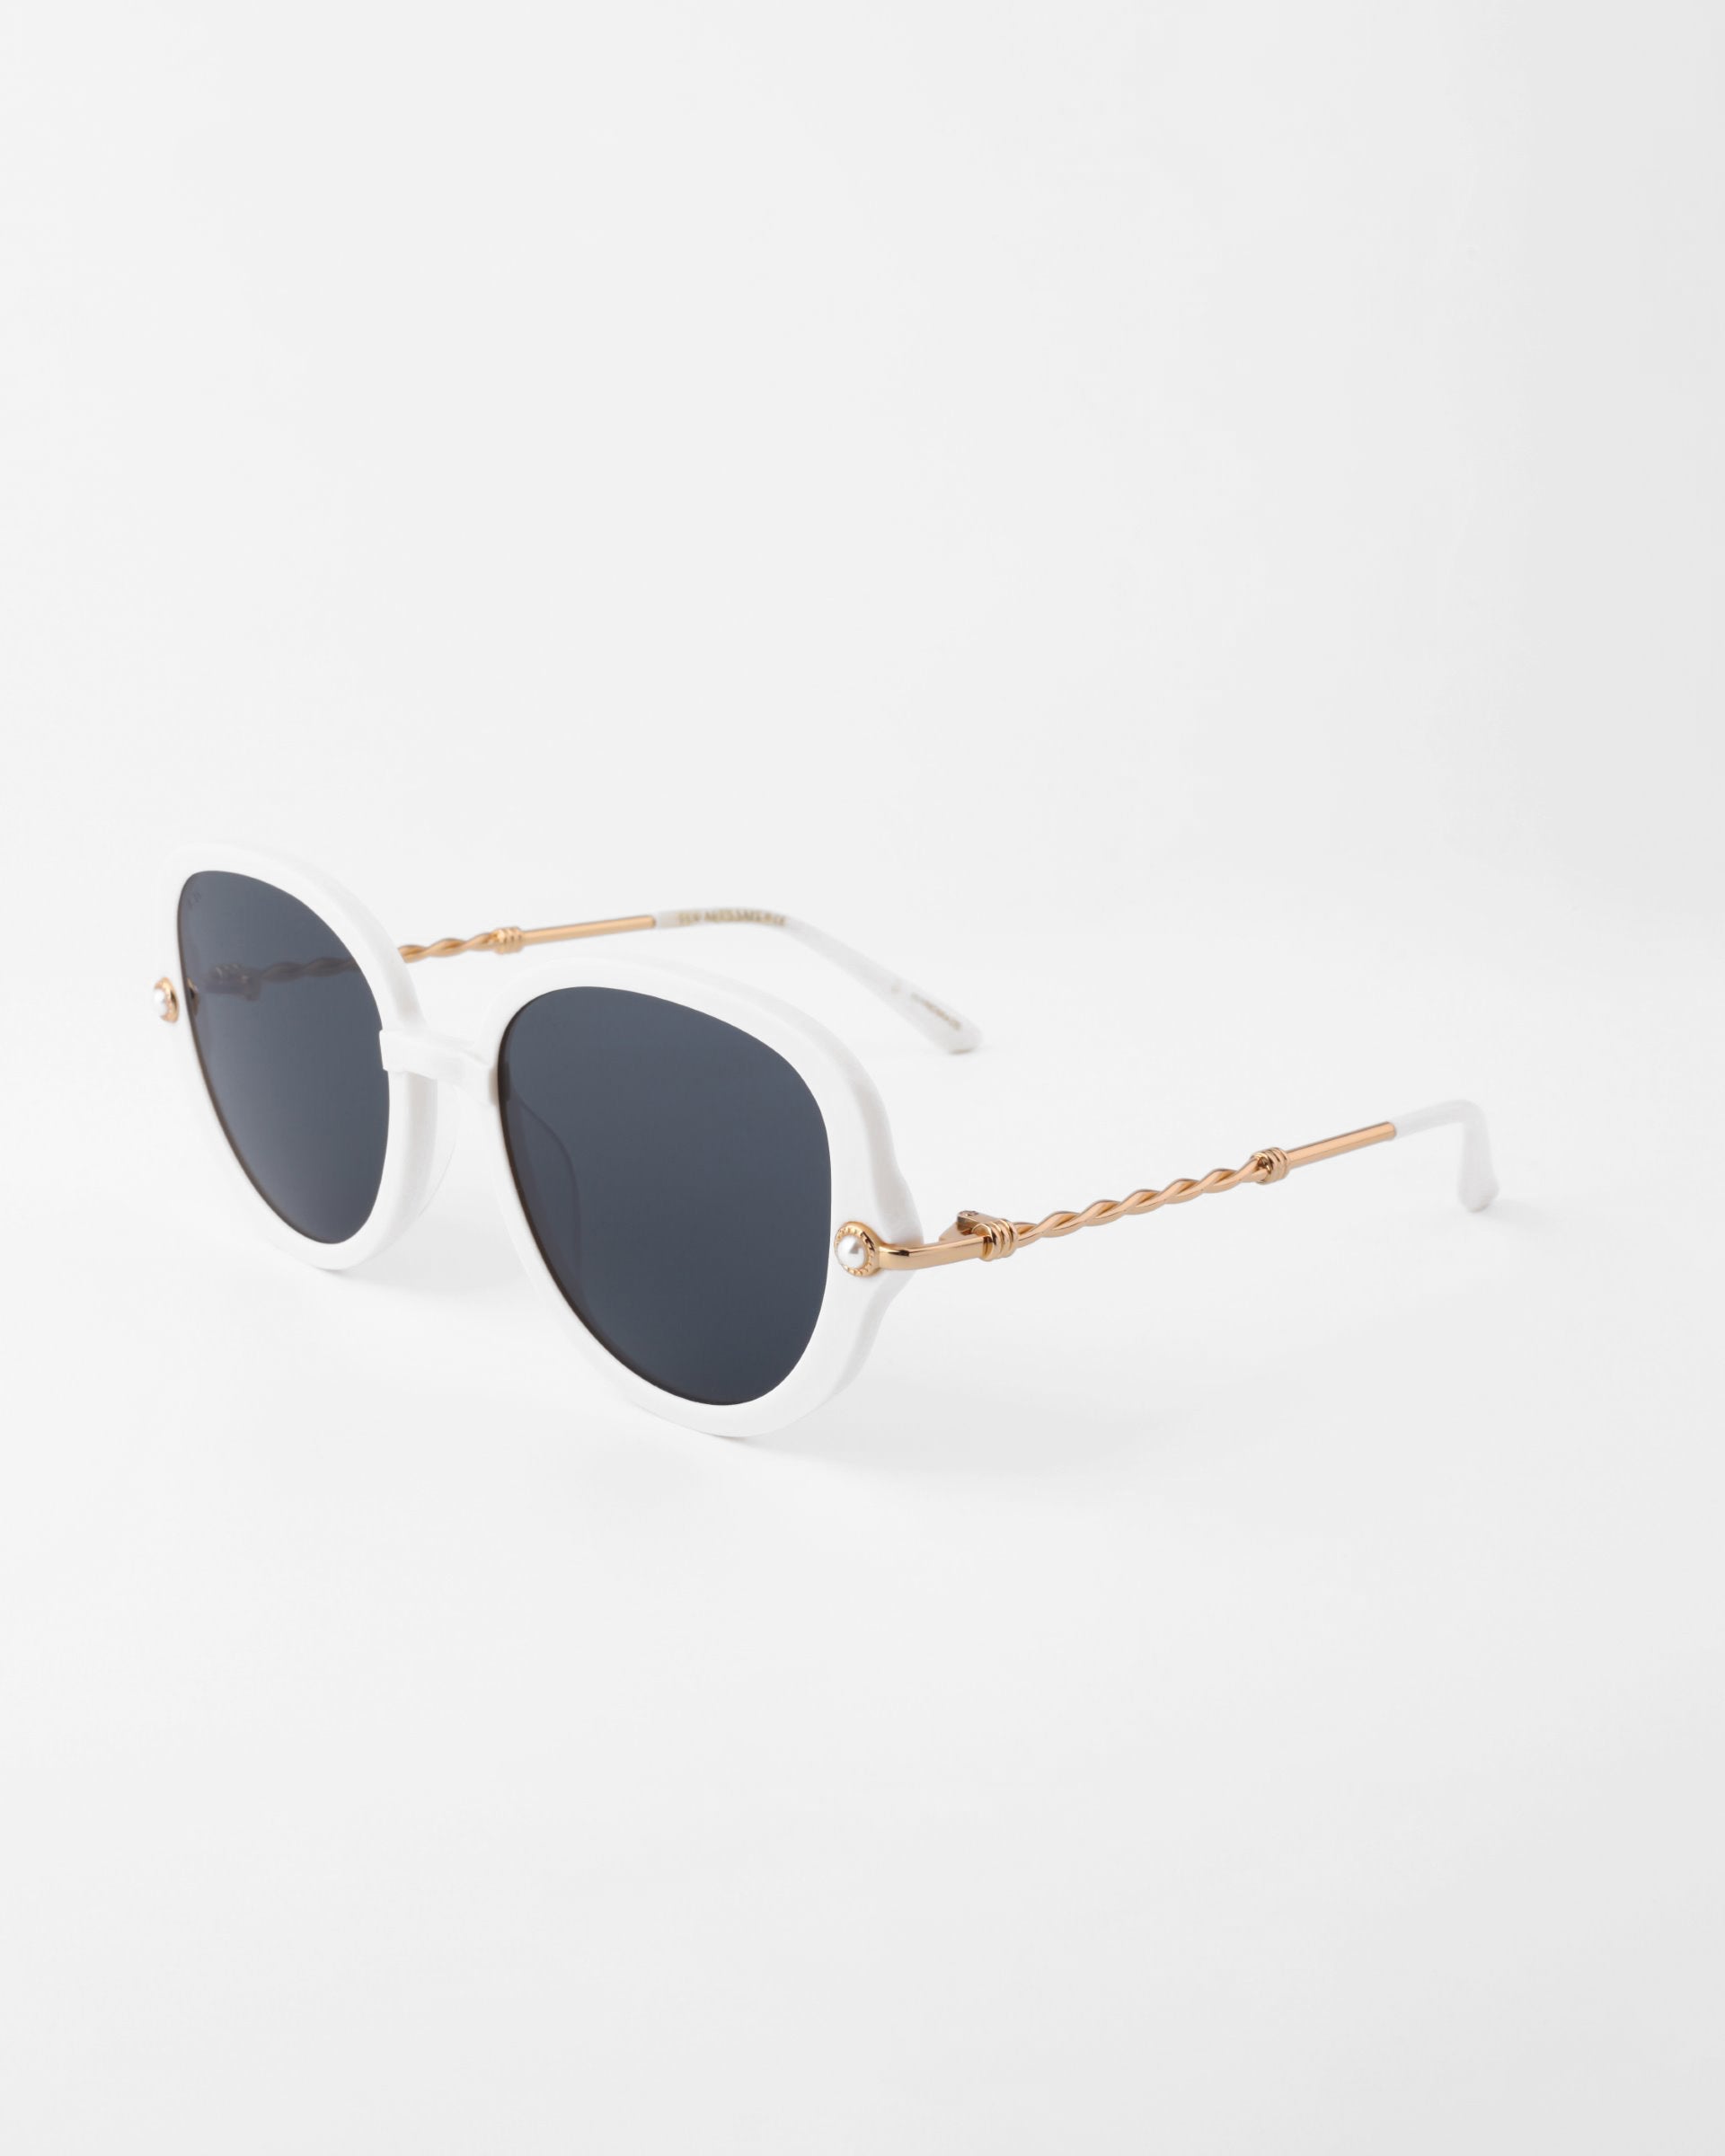 A pair of stylish round sunglasses featuring plant-based acetate white frames, dark lenses, and intricate handmade gold-plated temples with a twisted design, placed against a plain white background. The Primrose by For Art&#39;s Sake®.